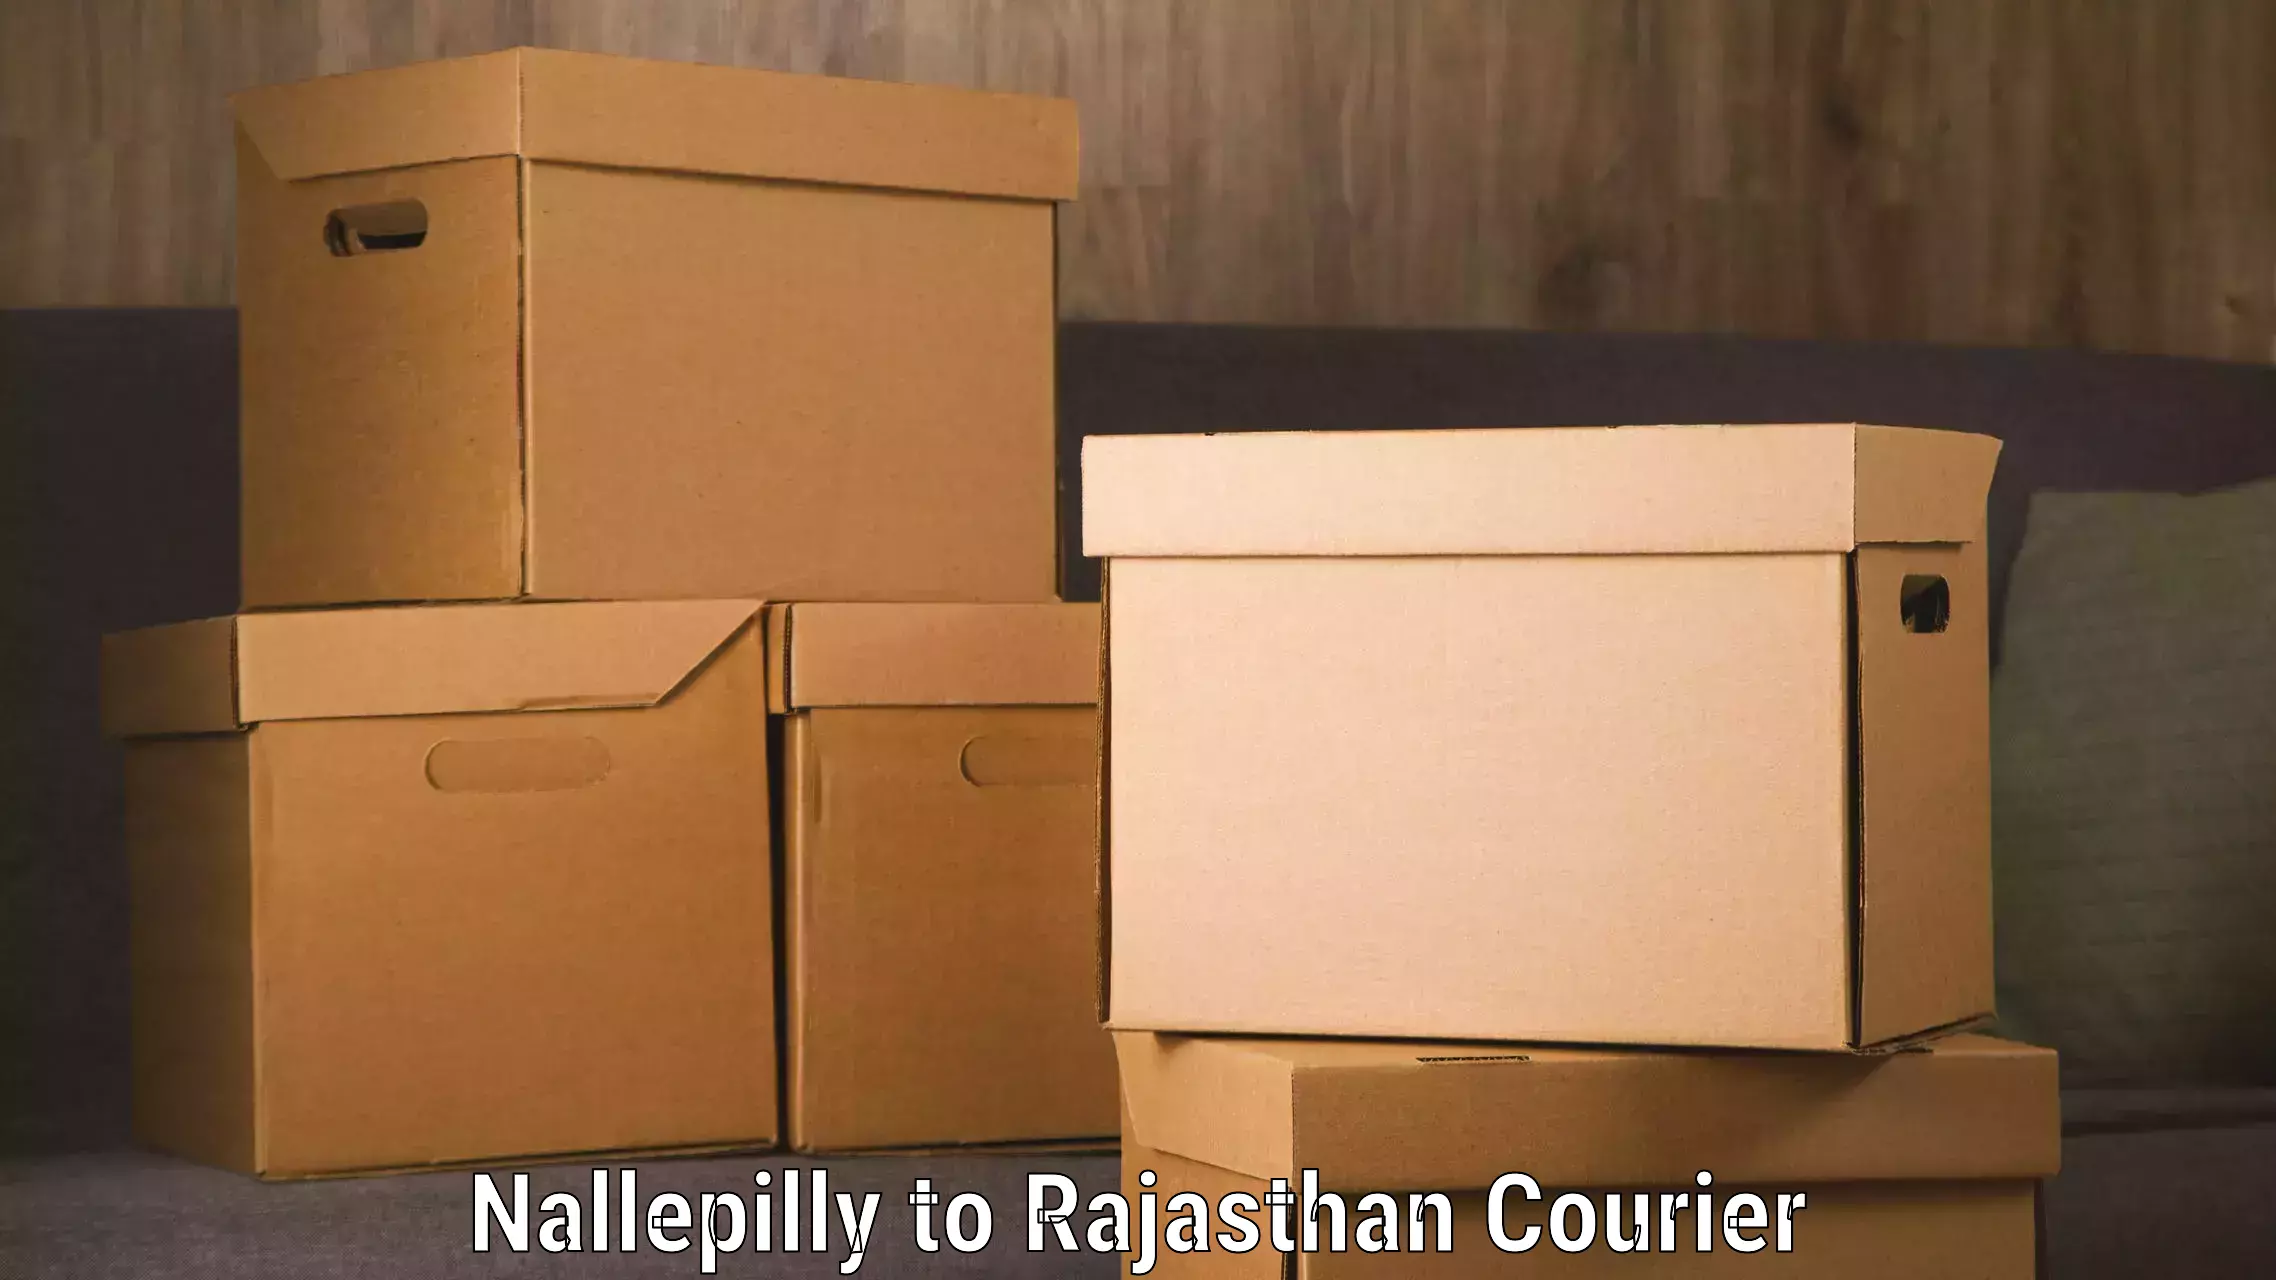 International courier networks Nallepilly to Bari Dholpur